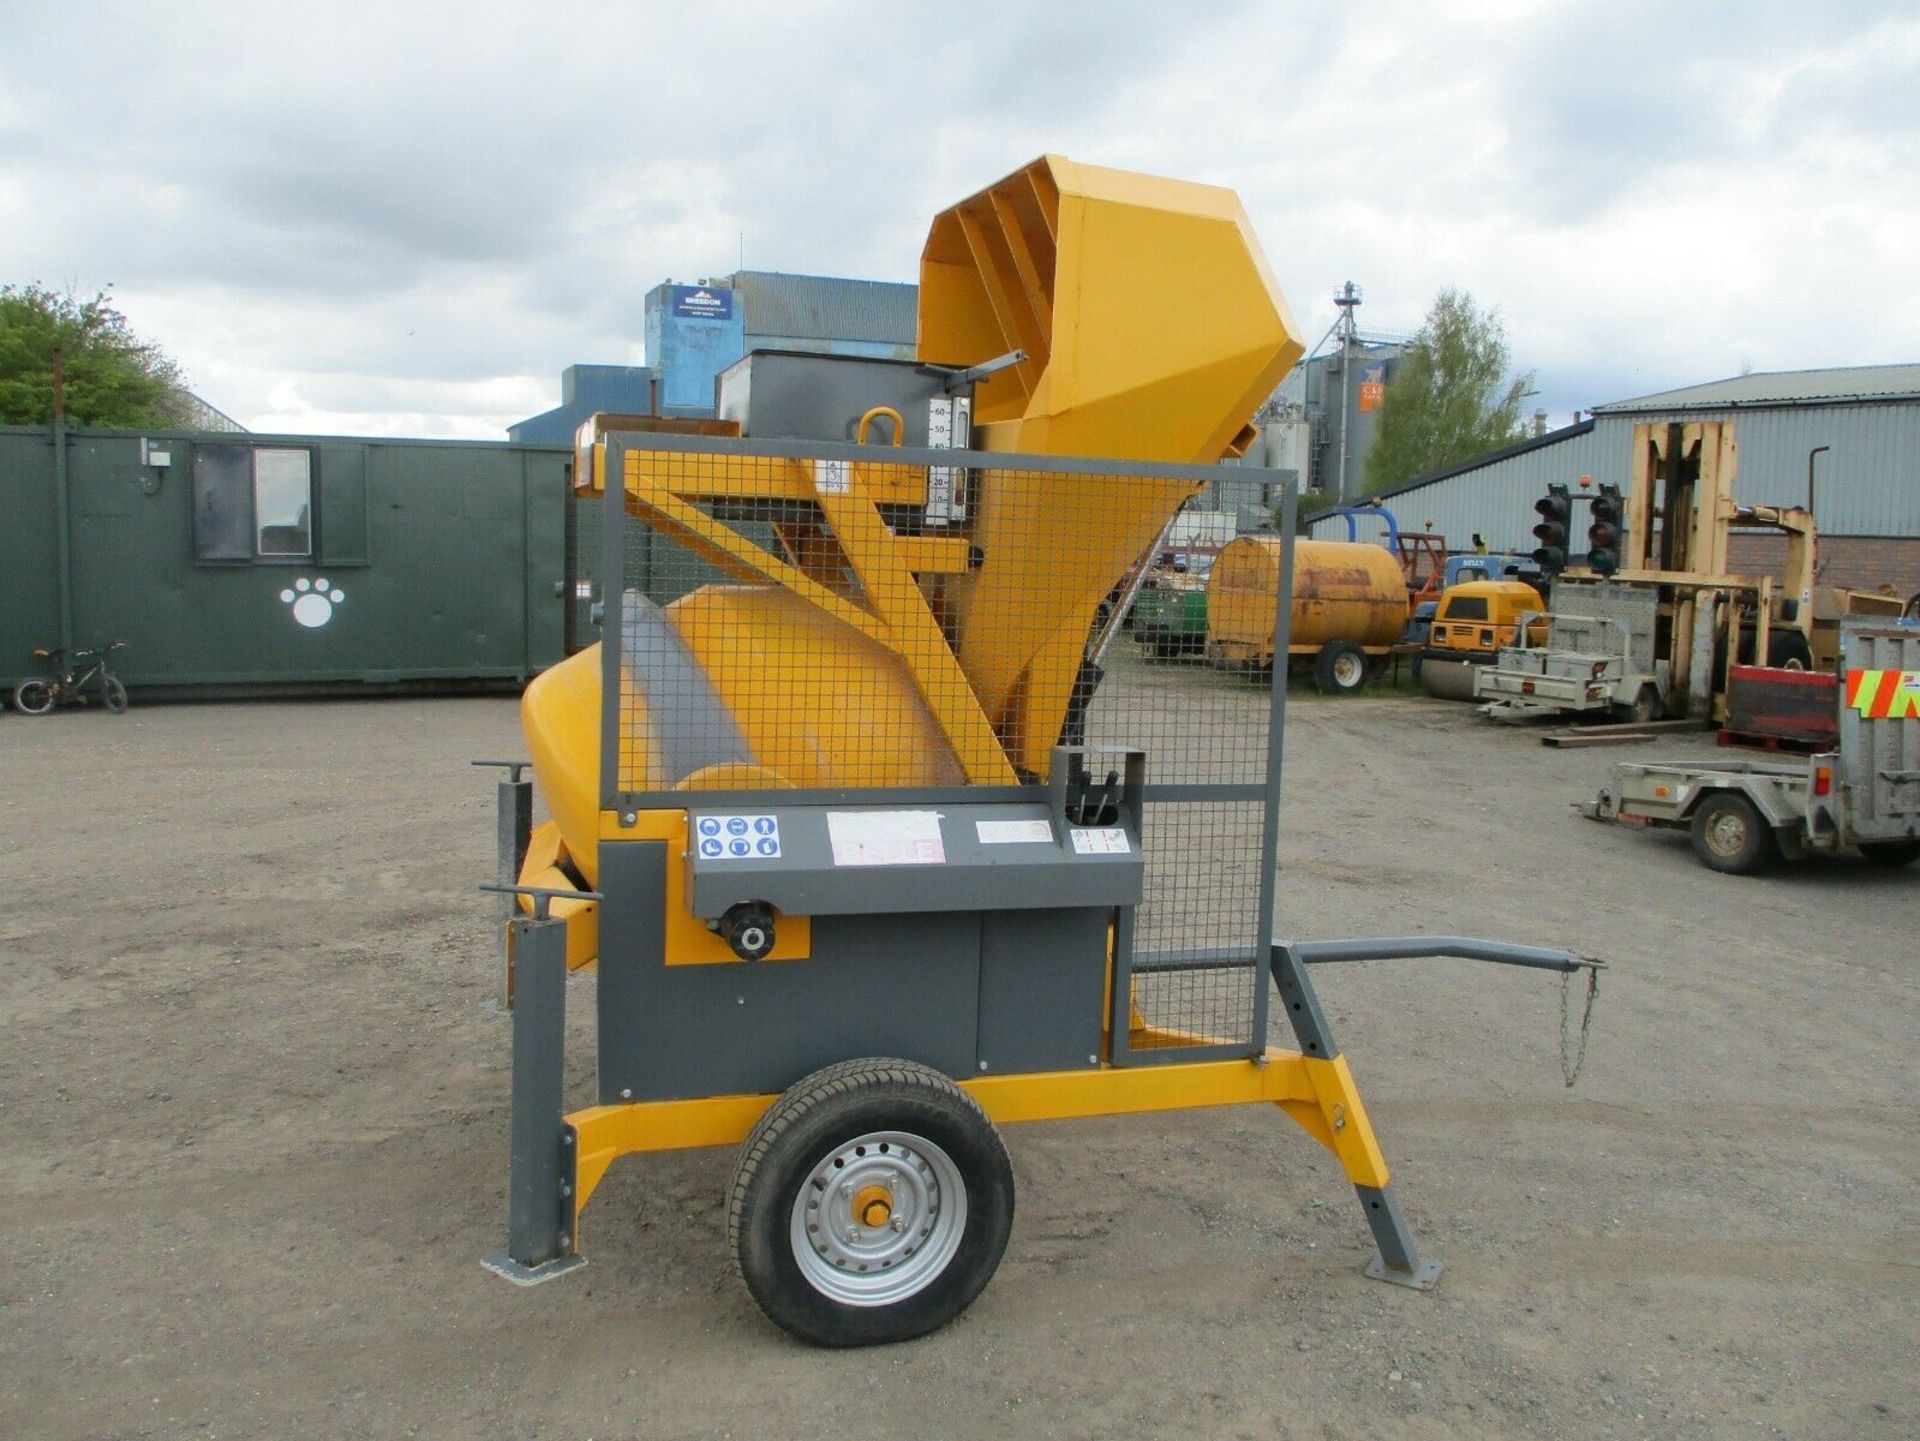 2019 Altrad Belle RB500B self loading diesel cement mixer - Image 4 of 7